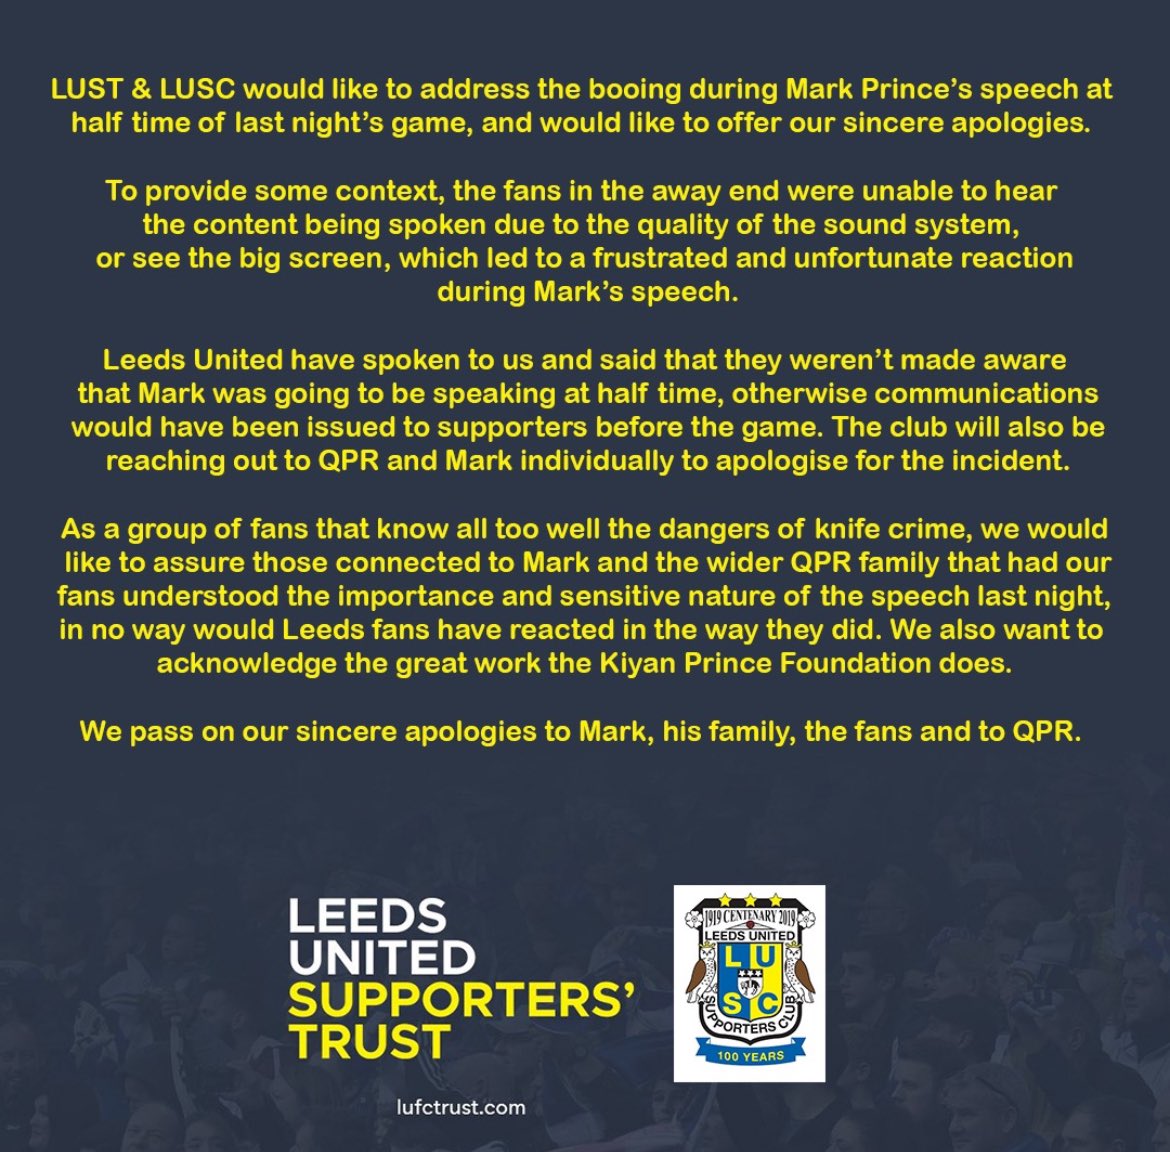 LUST and @LUSCExec would like address the booing during Mark Prince’s speech at half time of last night’s game at @QPR and we offer our sincere apologies.